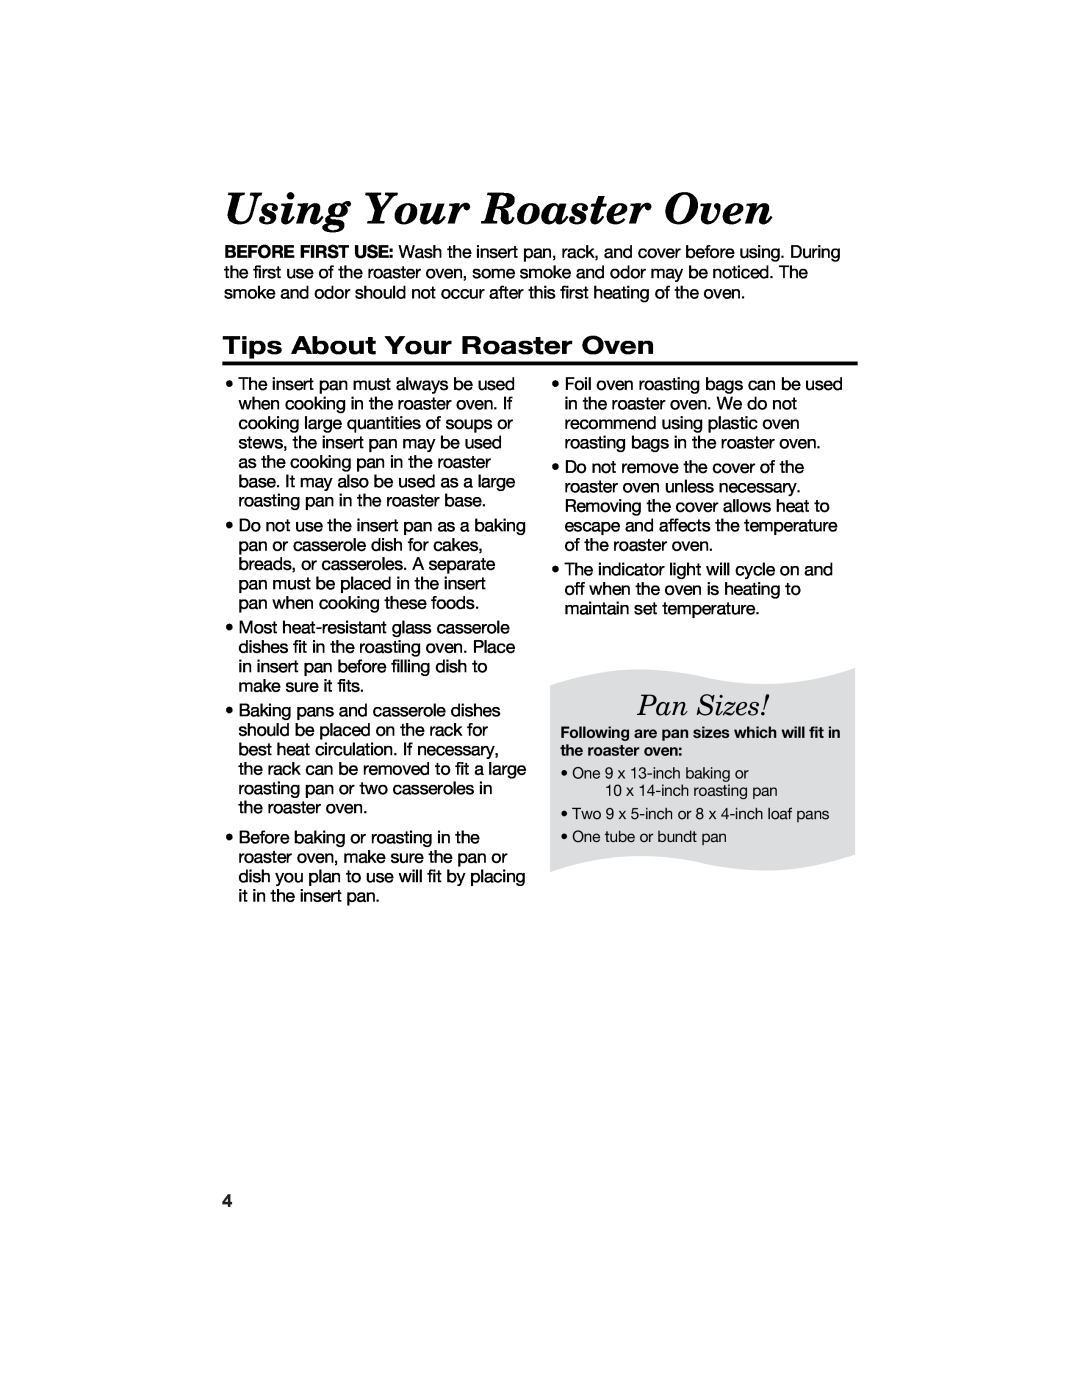 Hamilton Beach 840104300 manual Using Your Roaster Oven, Pan Sizes, Tips About Your Roaster Oven 